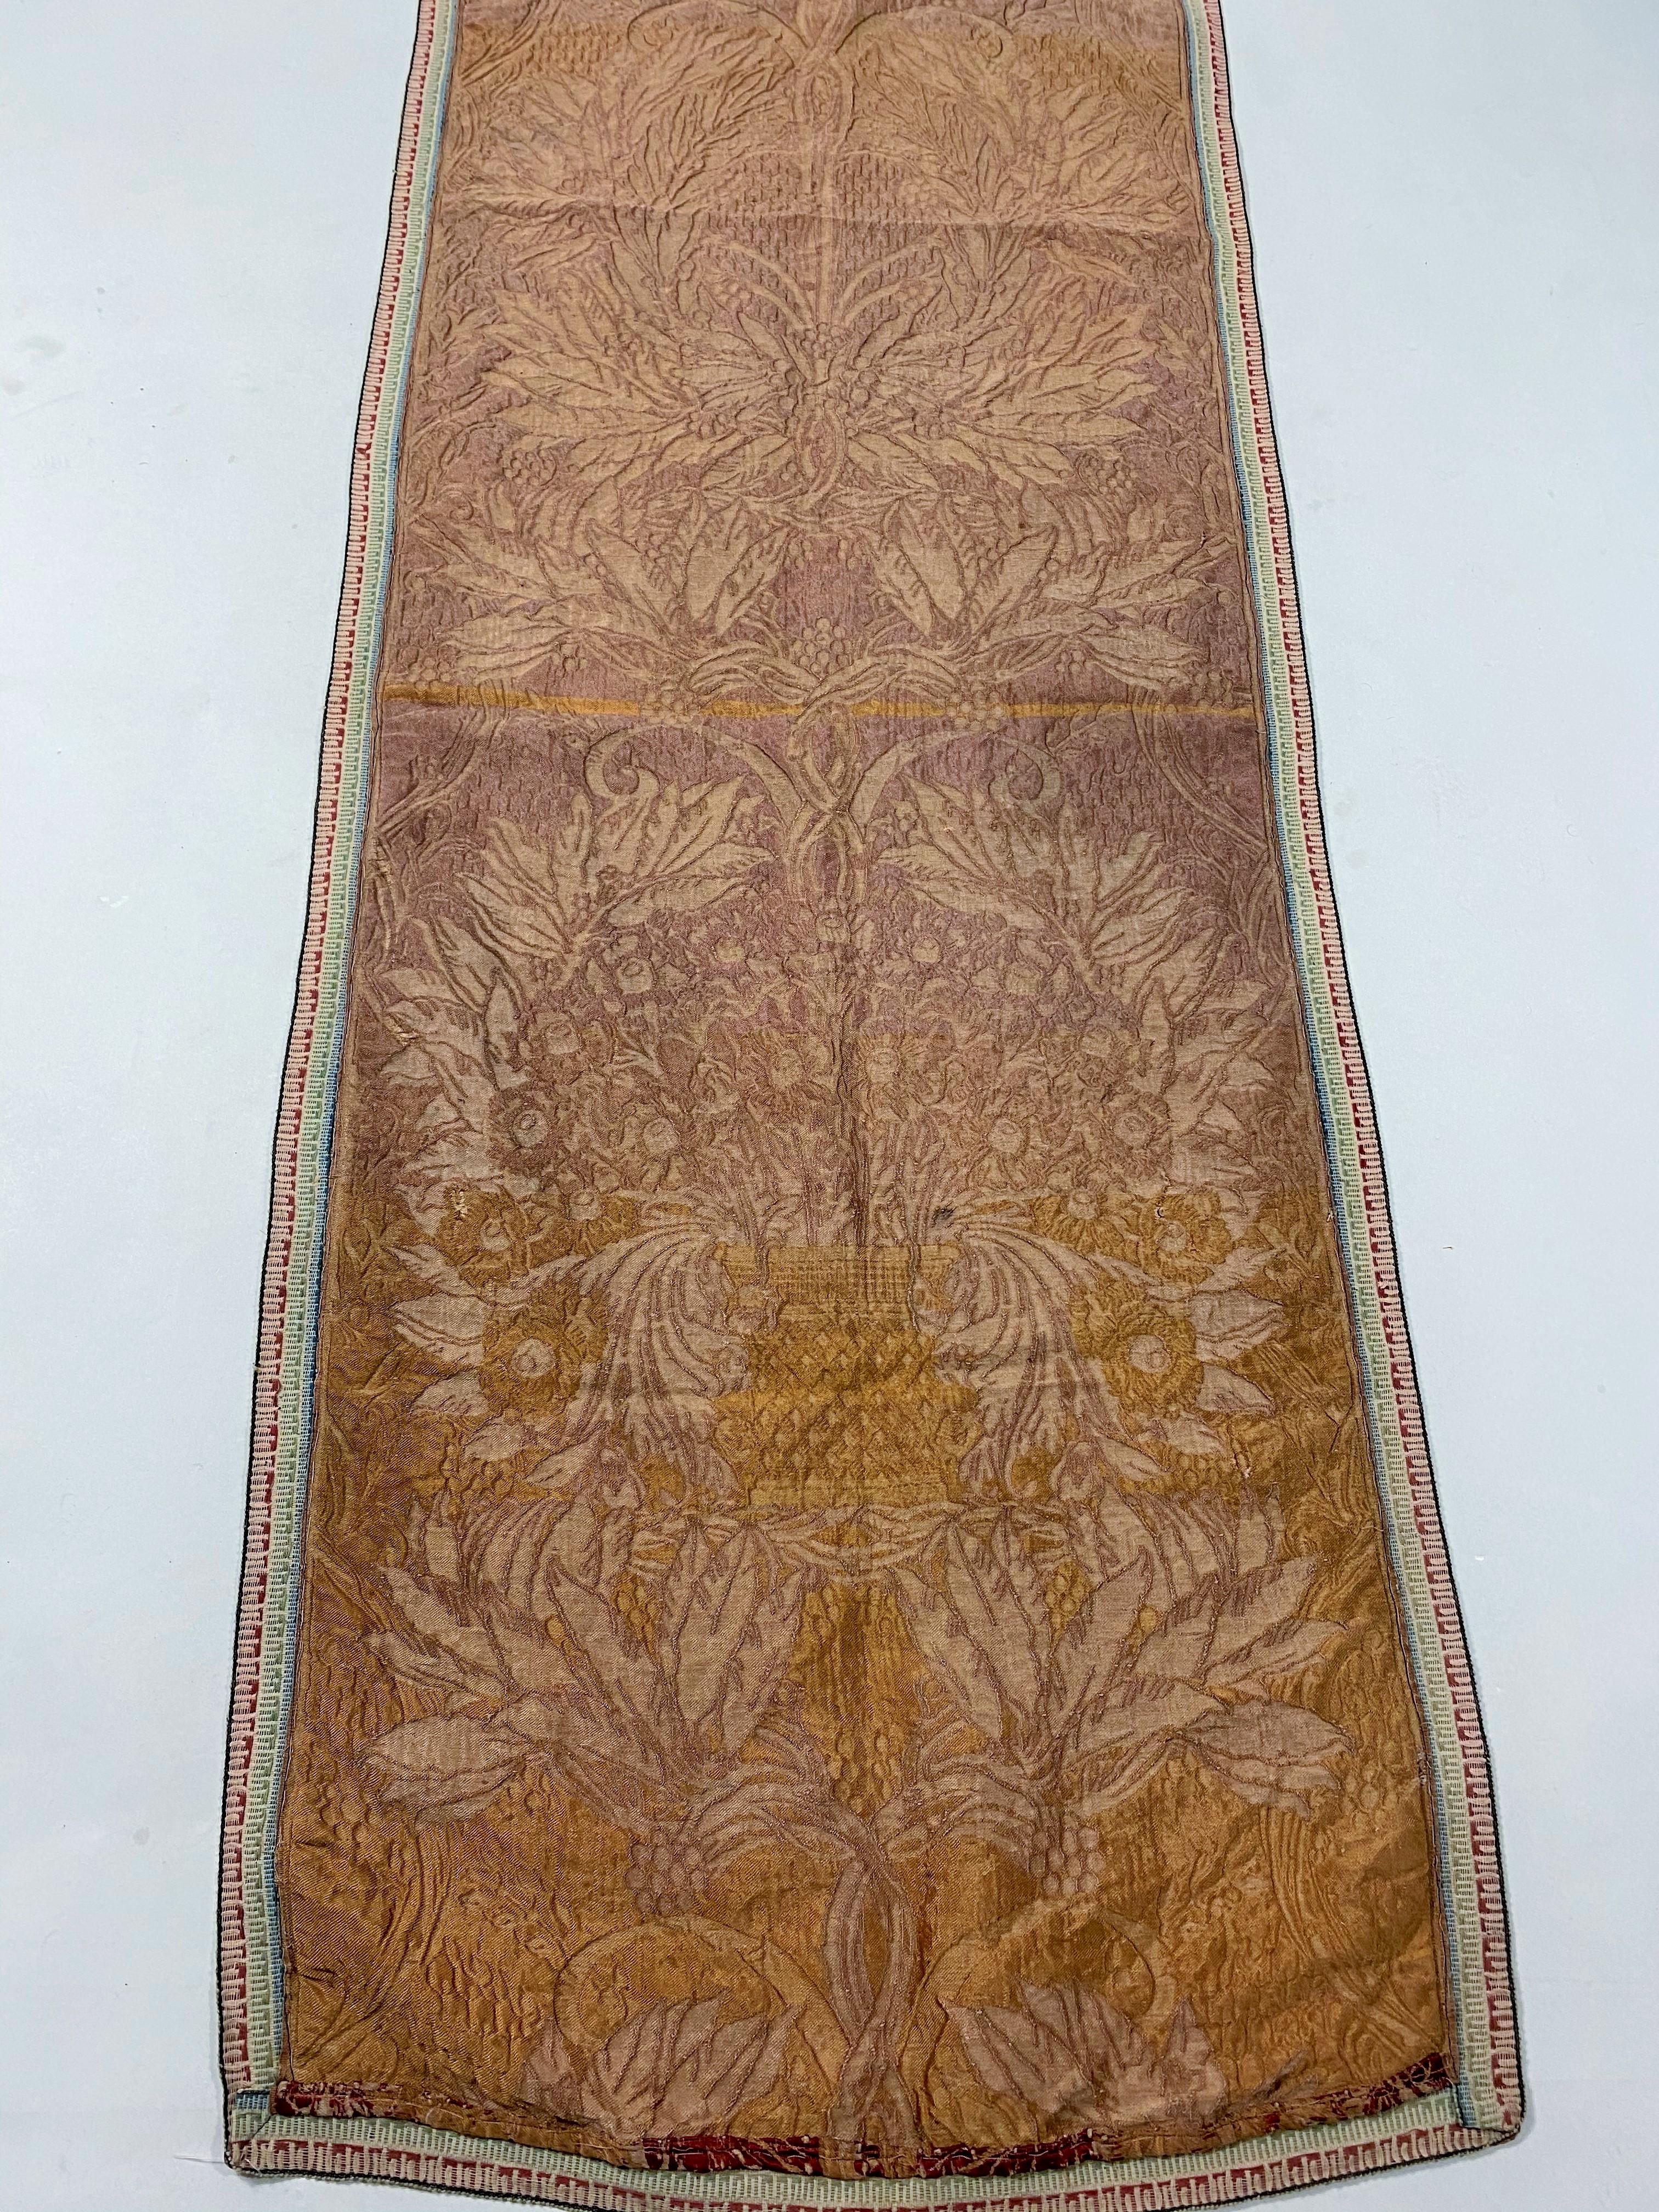 A French Art Nouveau Brocaded Silk by Adrien Karbowsky - Tassinari & Chatel 1899 For Sale 9